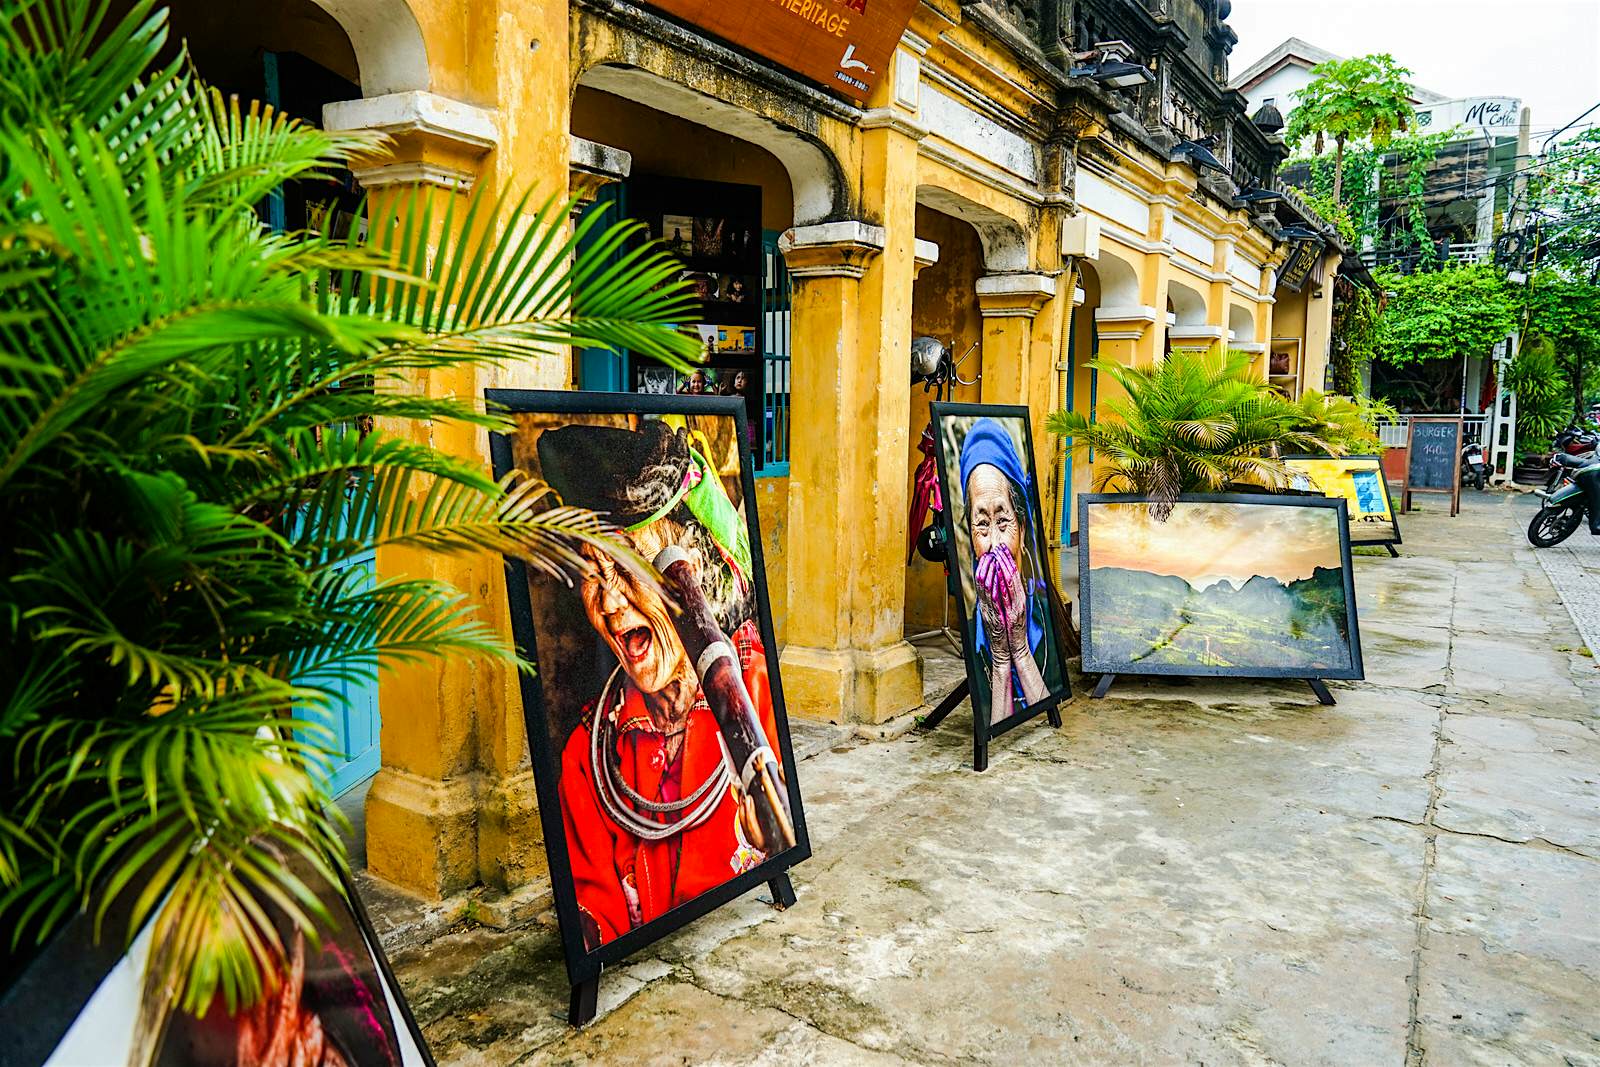 Large paintings of women in traditional dress sit either side of a yellow archway leading to a shop entrance